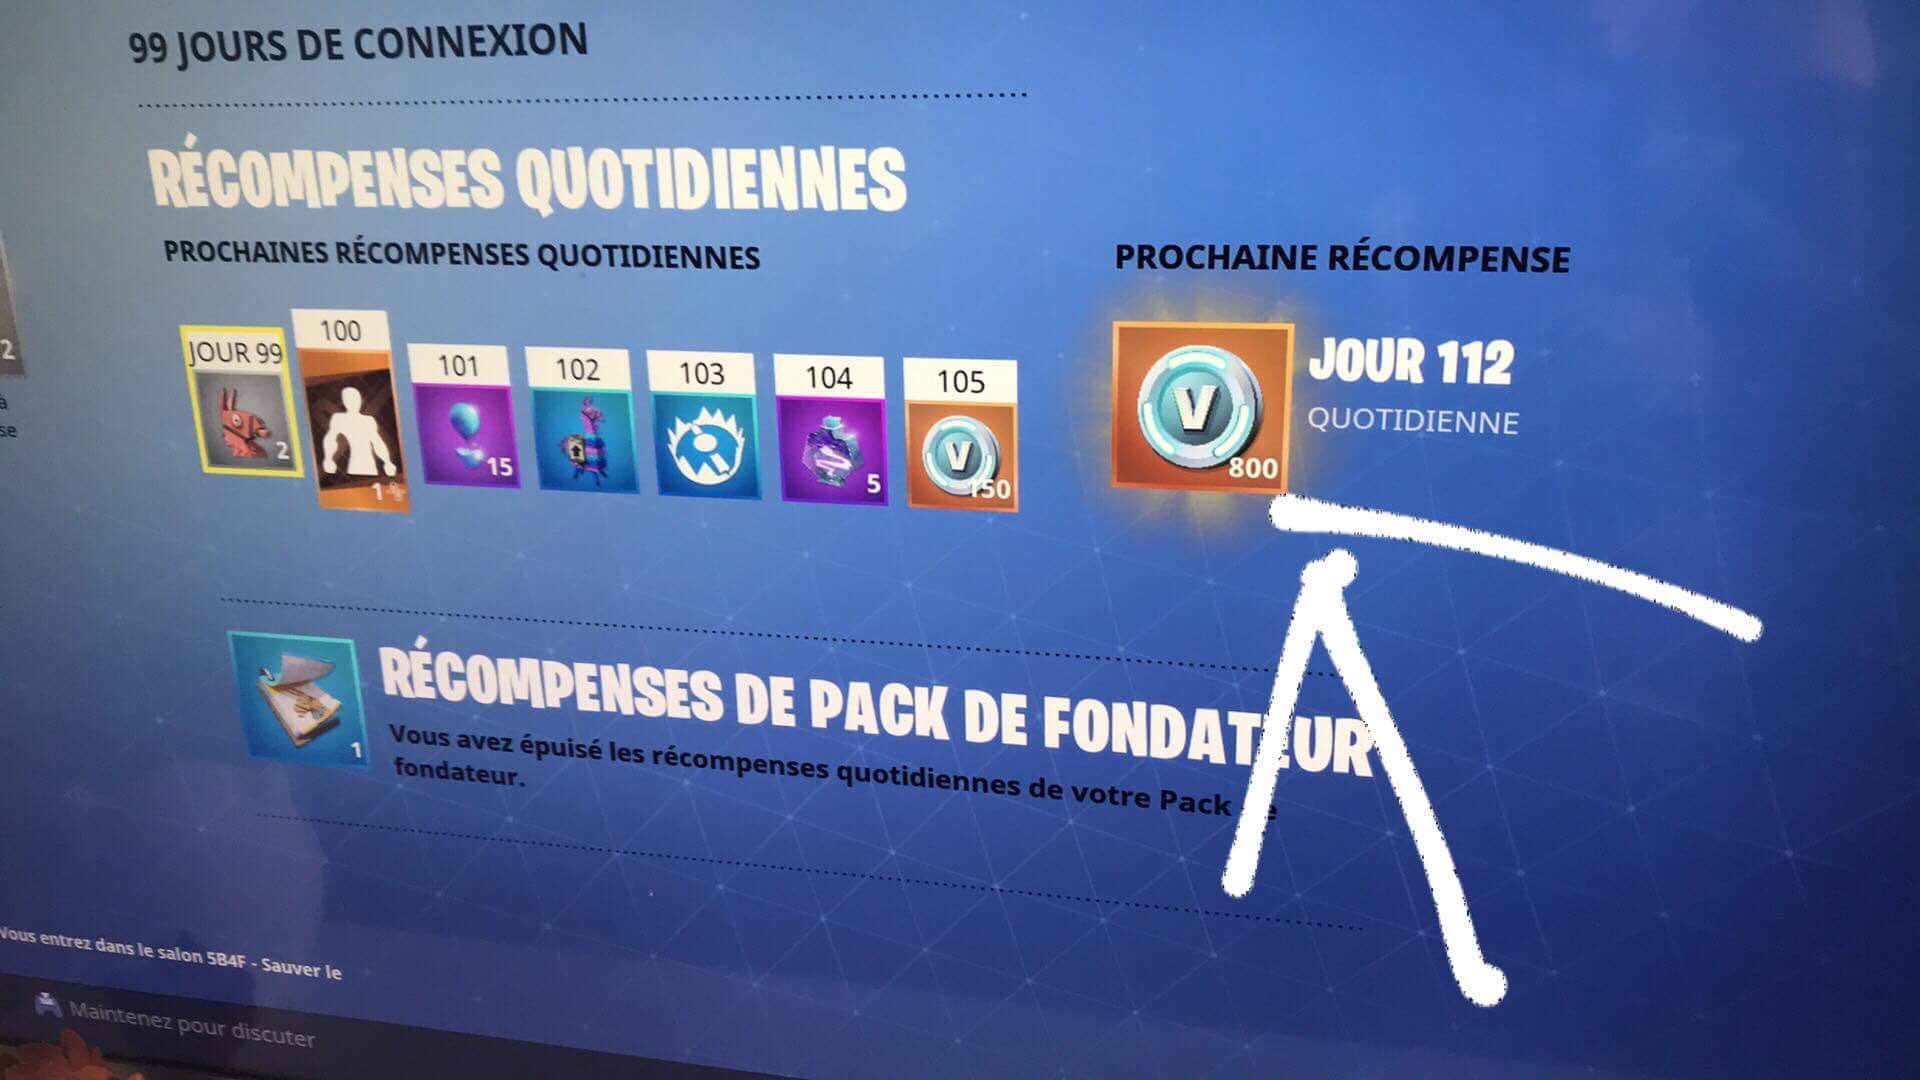 18575024 clud8 jpg - fortnite recompense journaliere